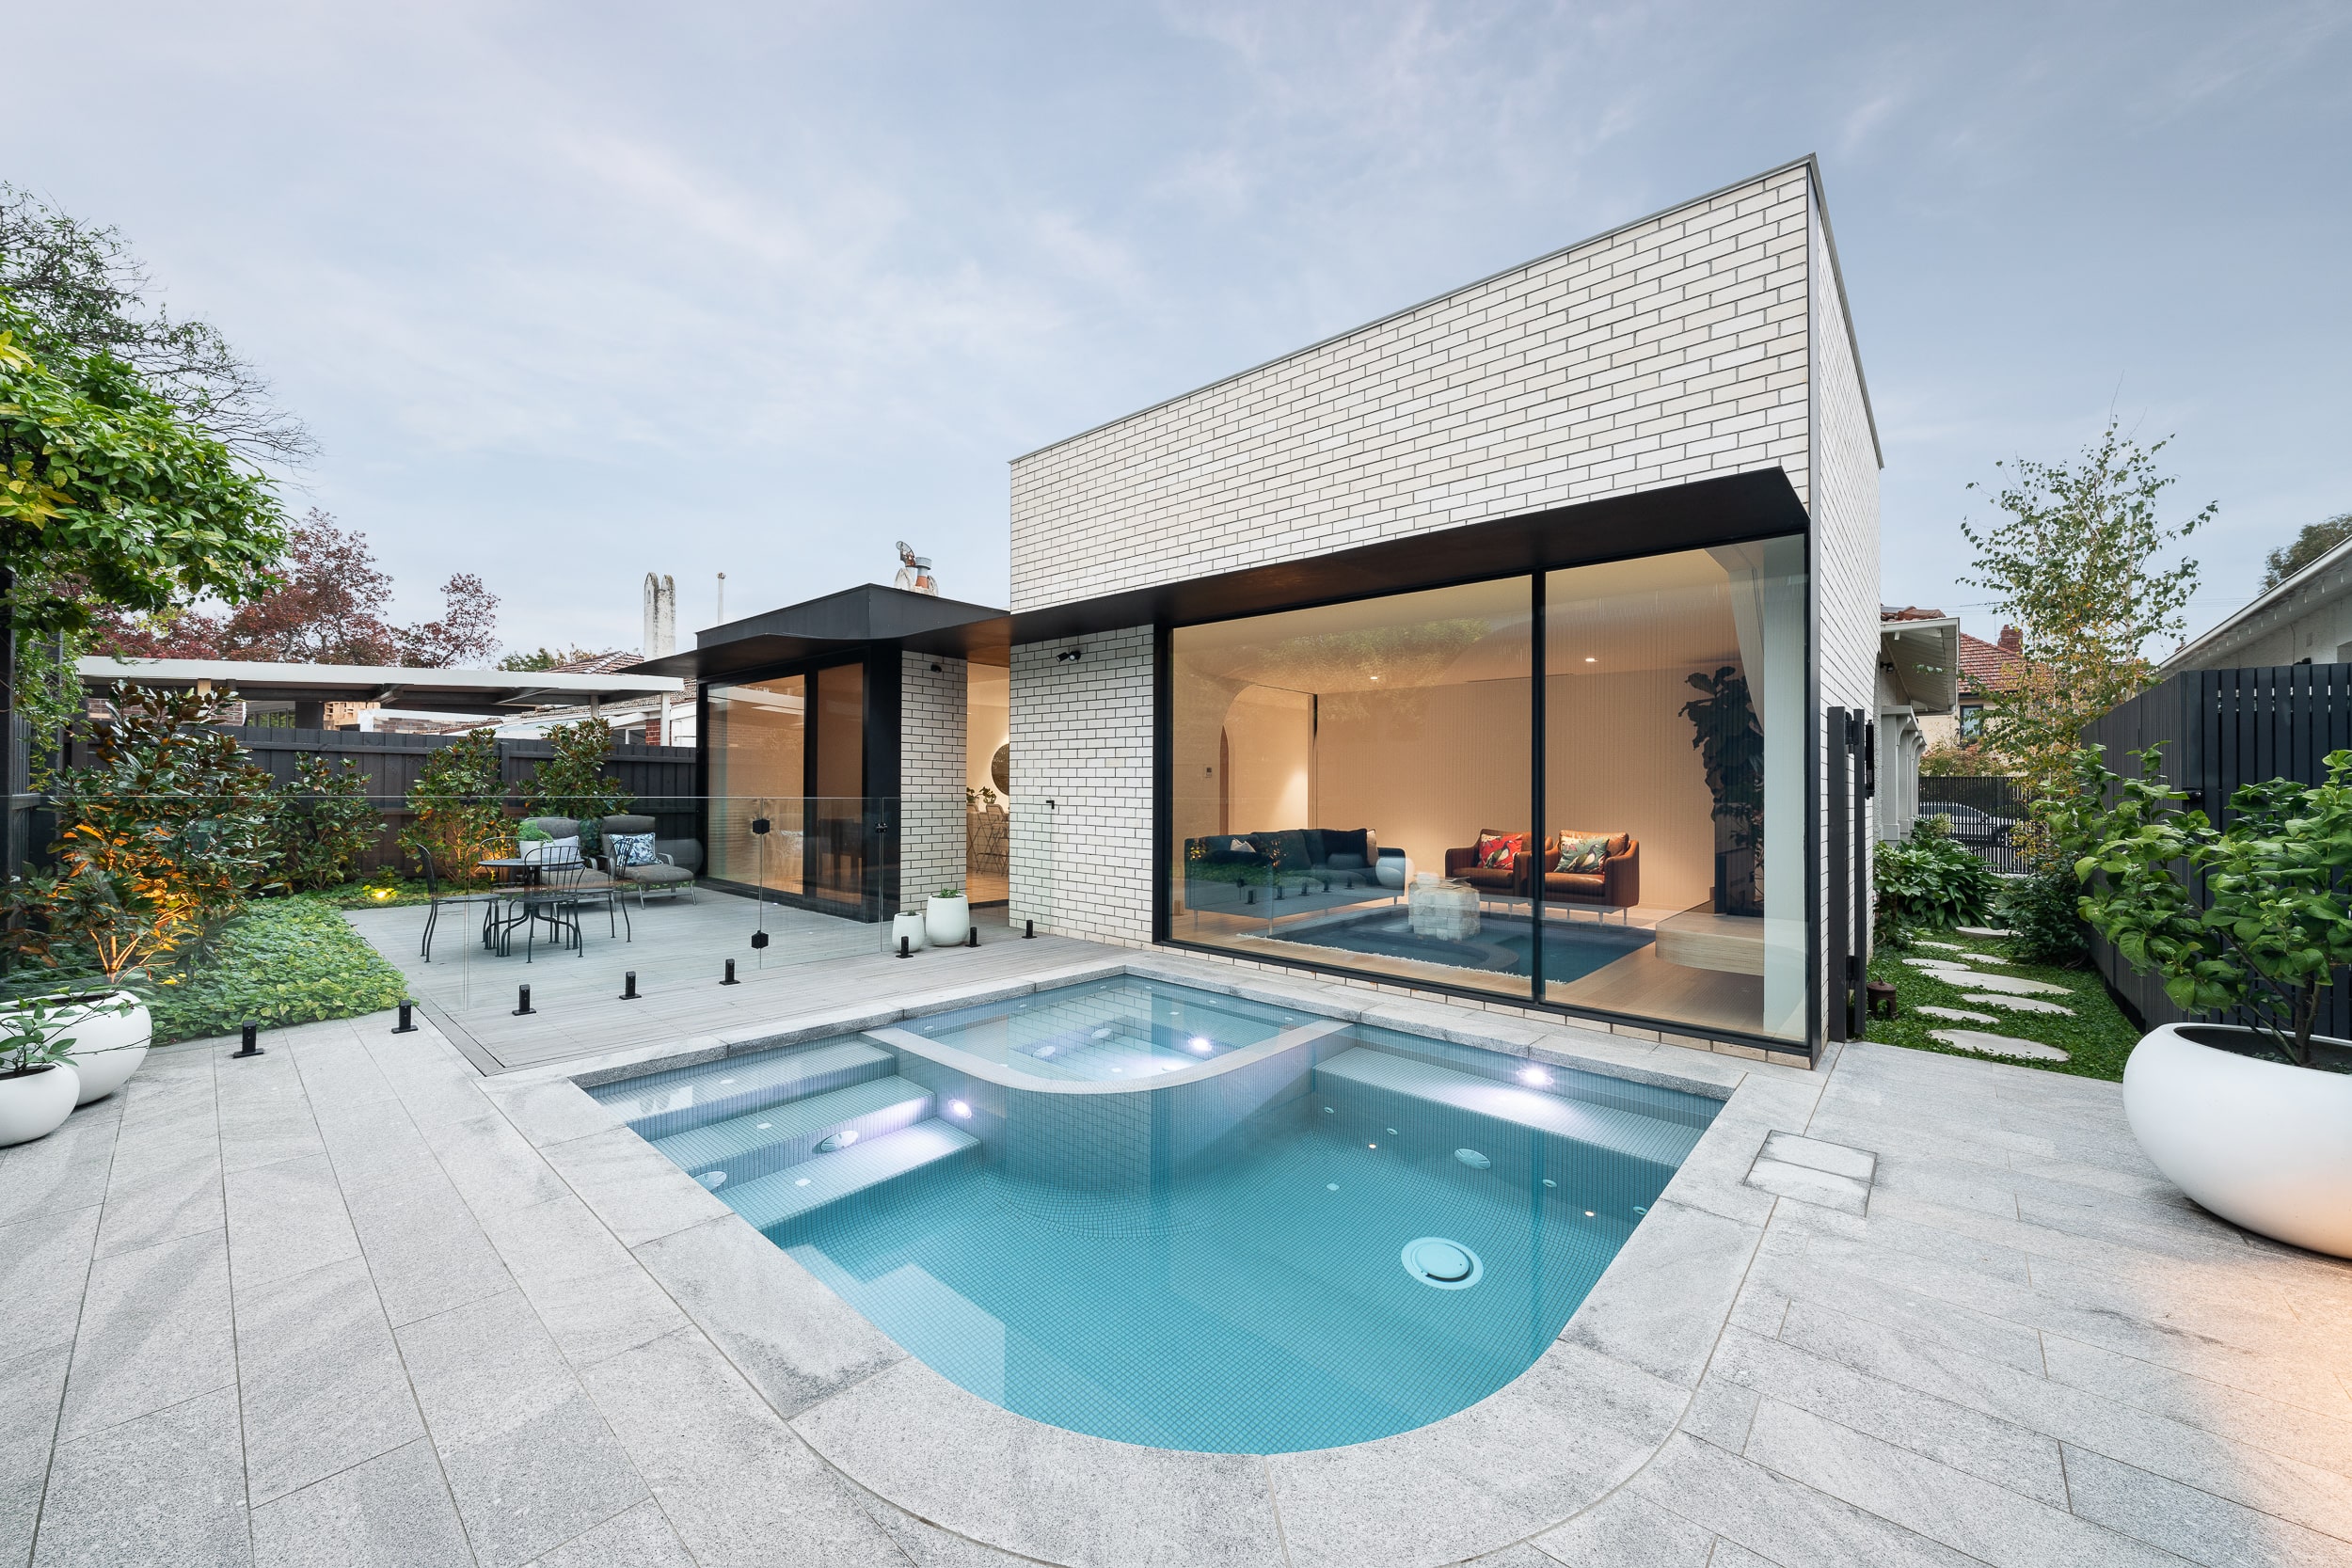 Image of completed in-ground concrete pool and spa project in Ripponlea, Melbourne.